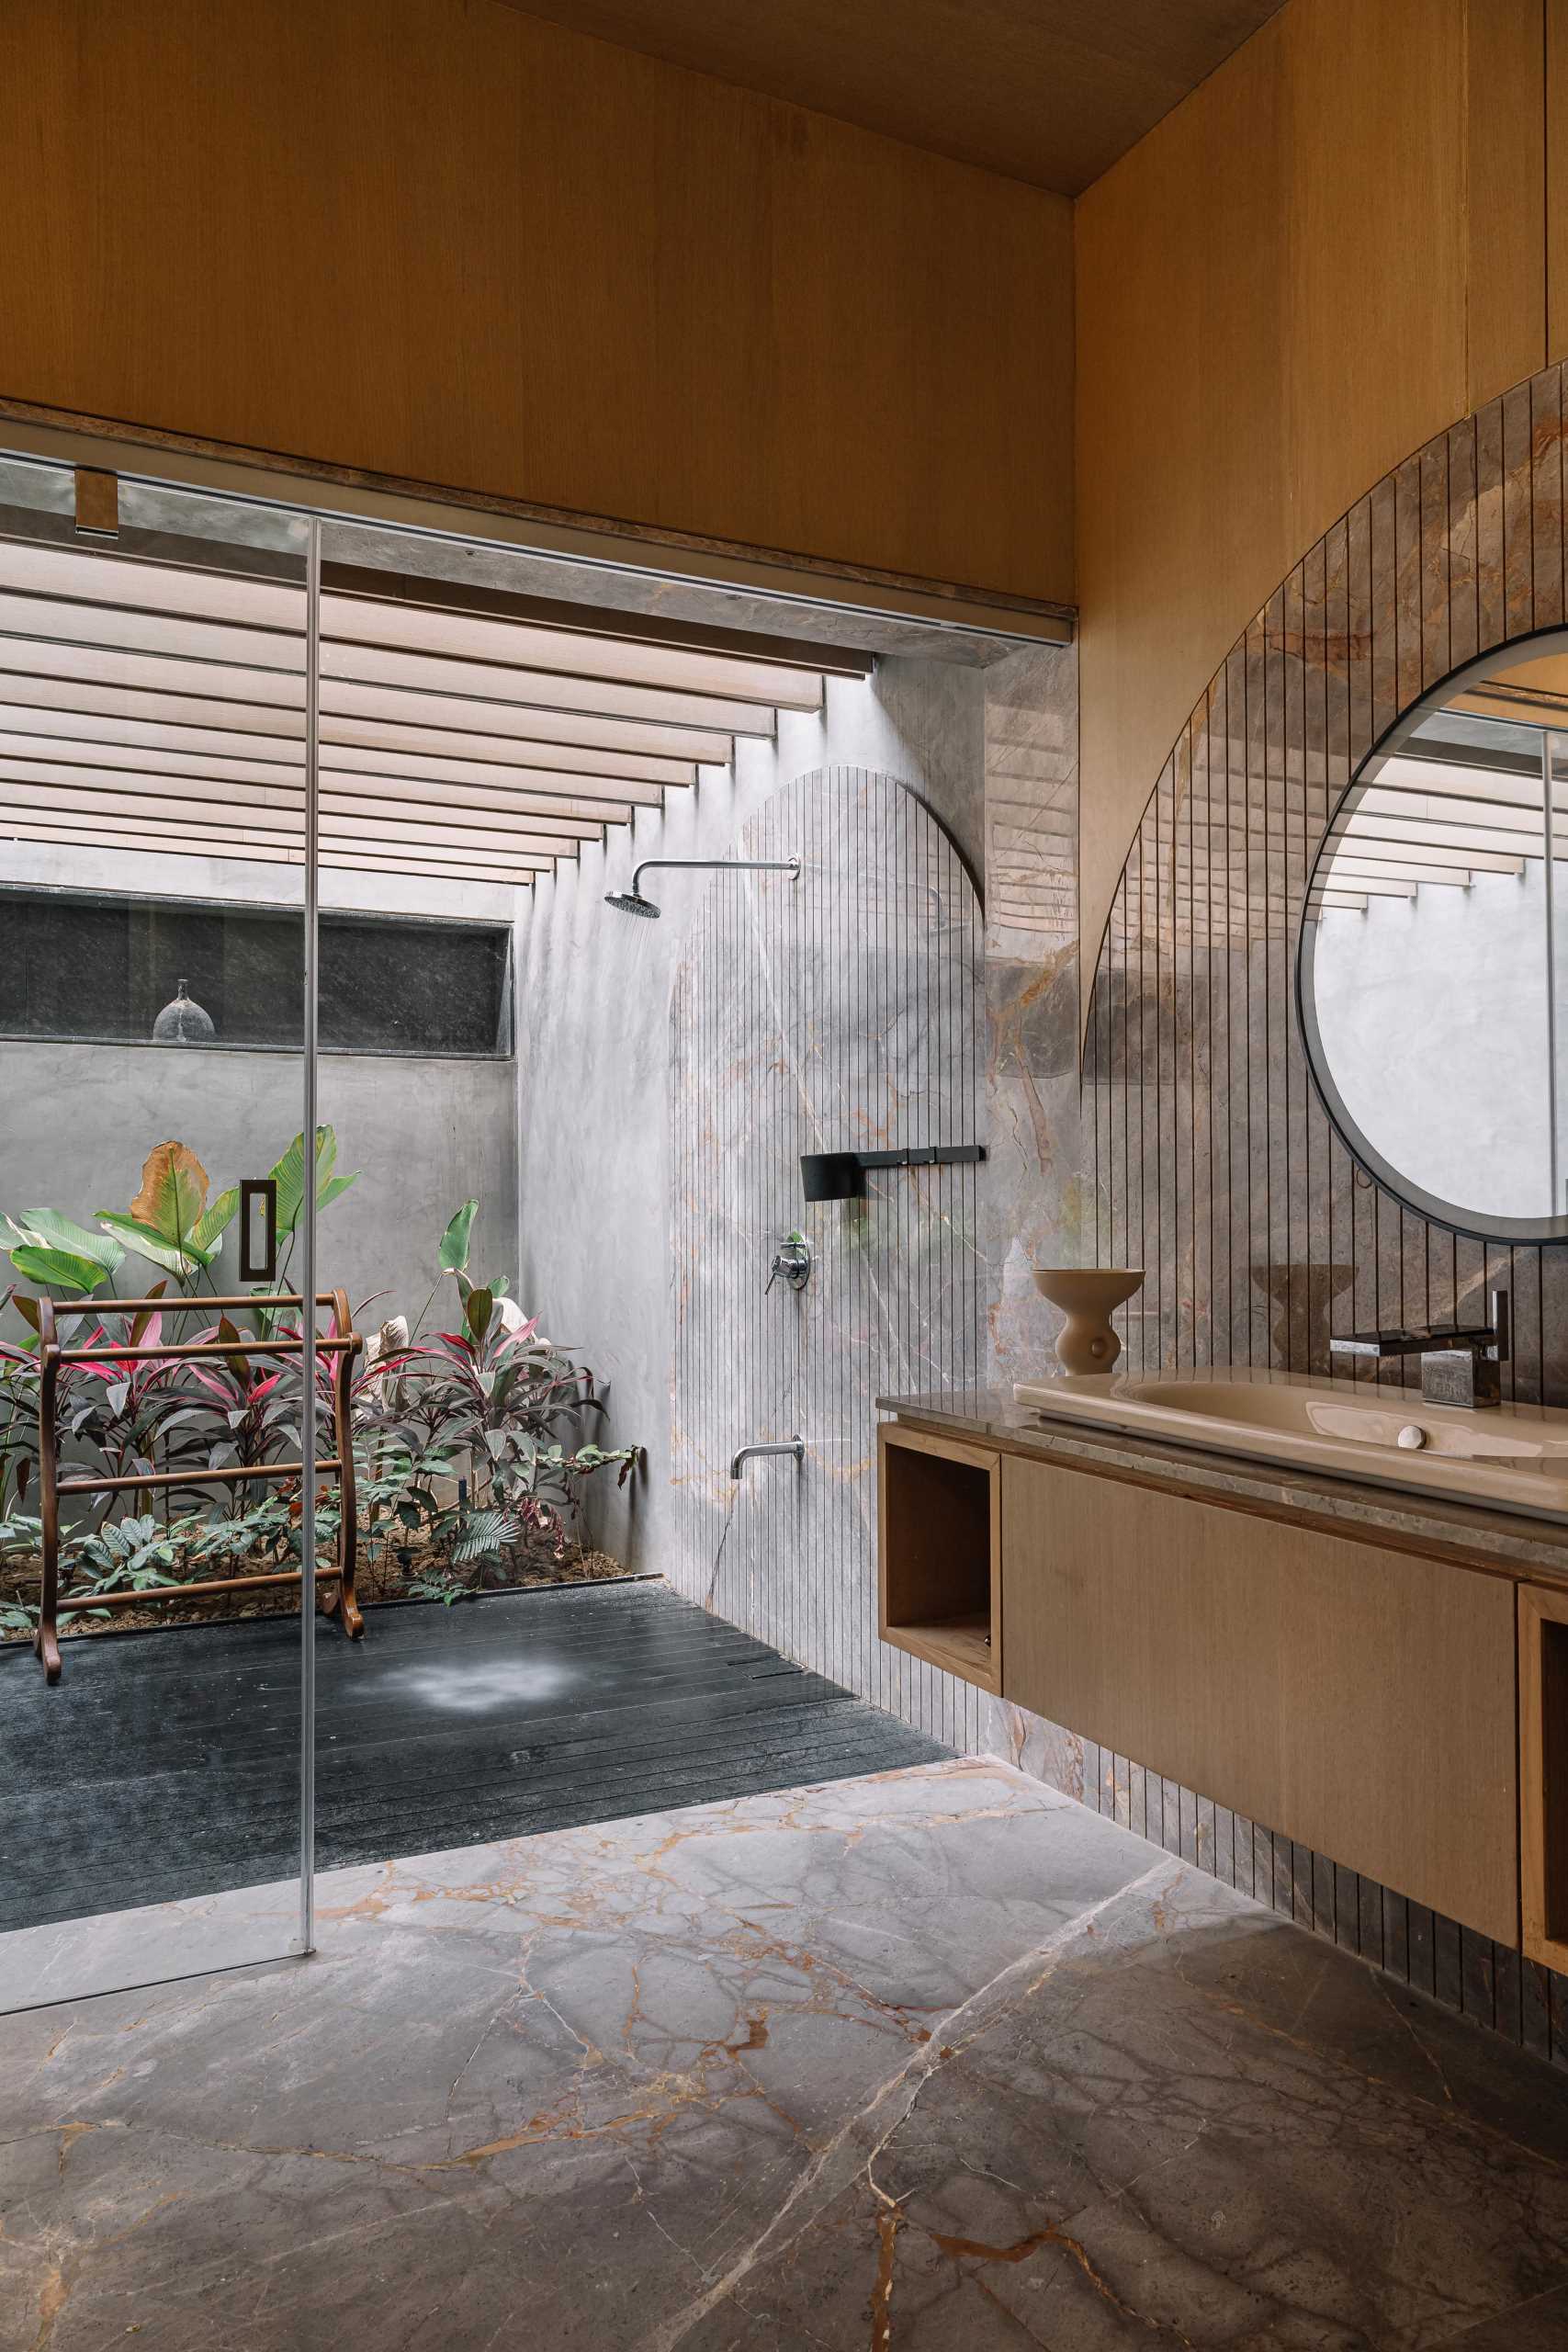 A modern bathroom with a private outdoor shower.